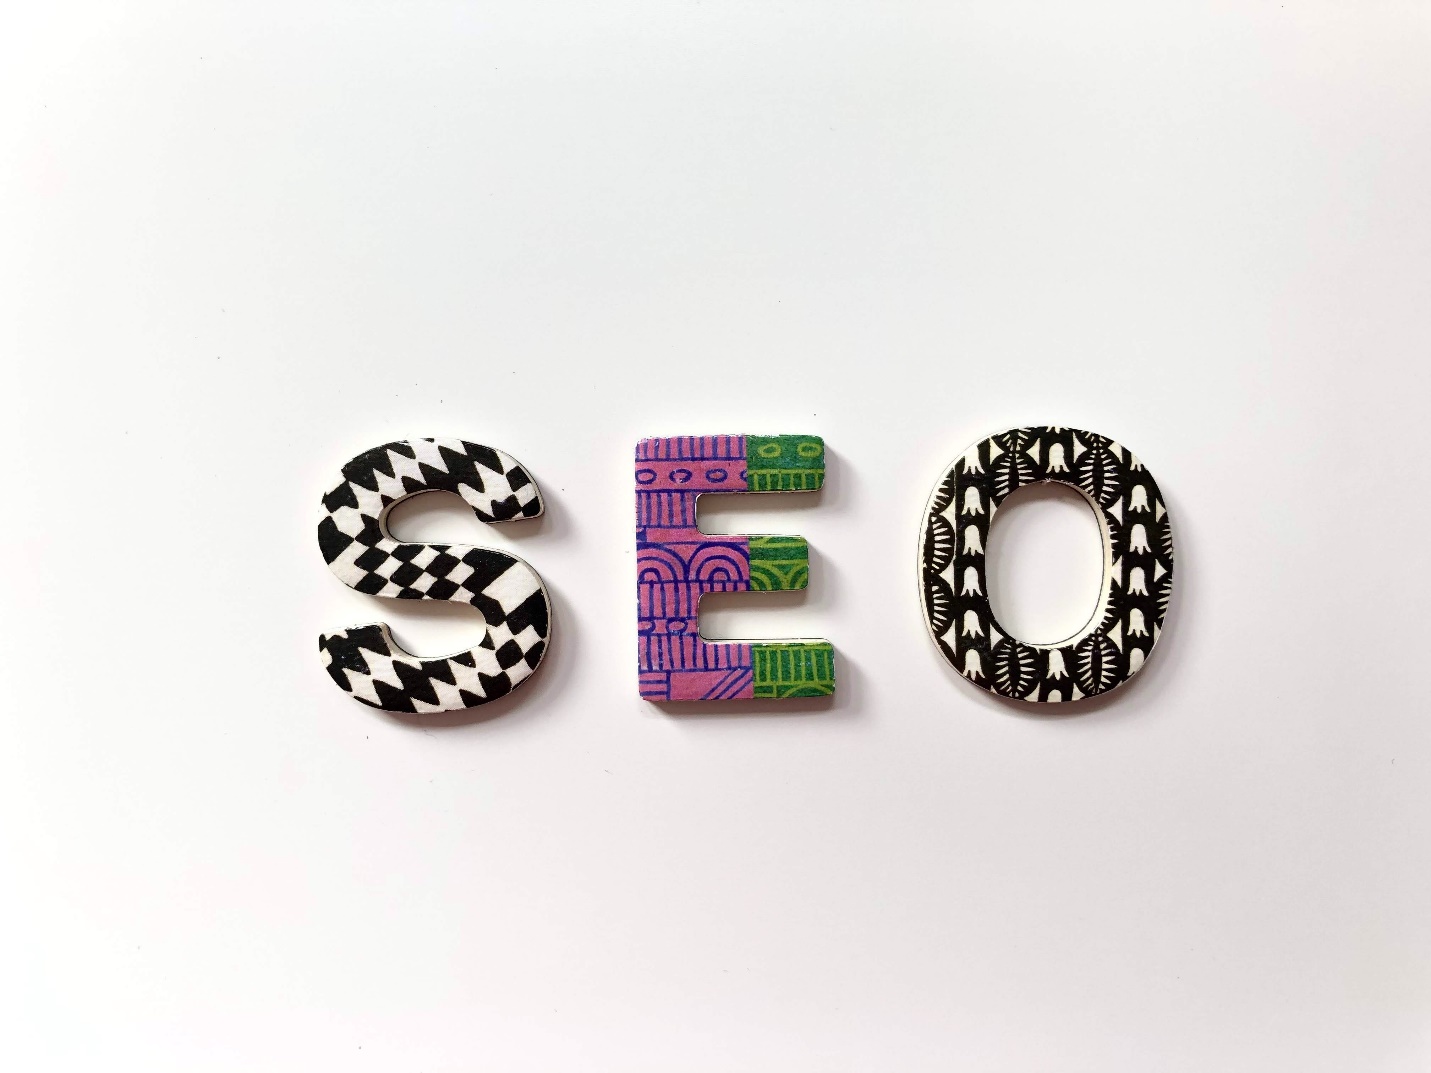 SEO Spelled out in a Digital Wallpaper